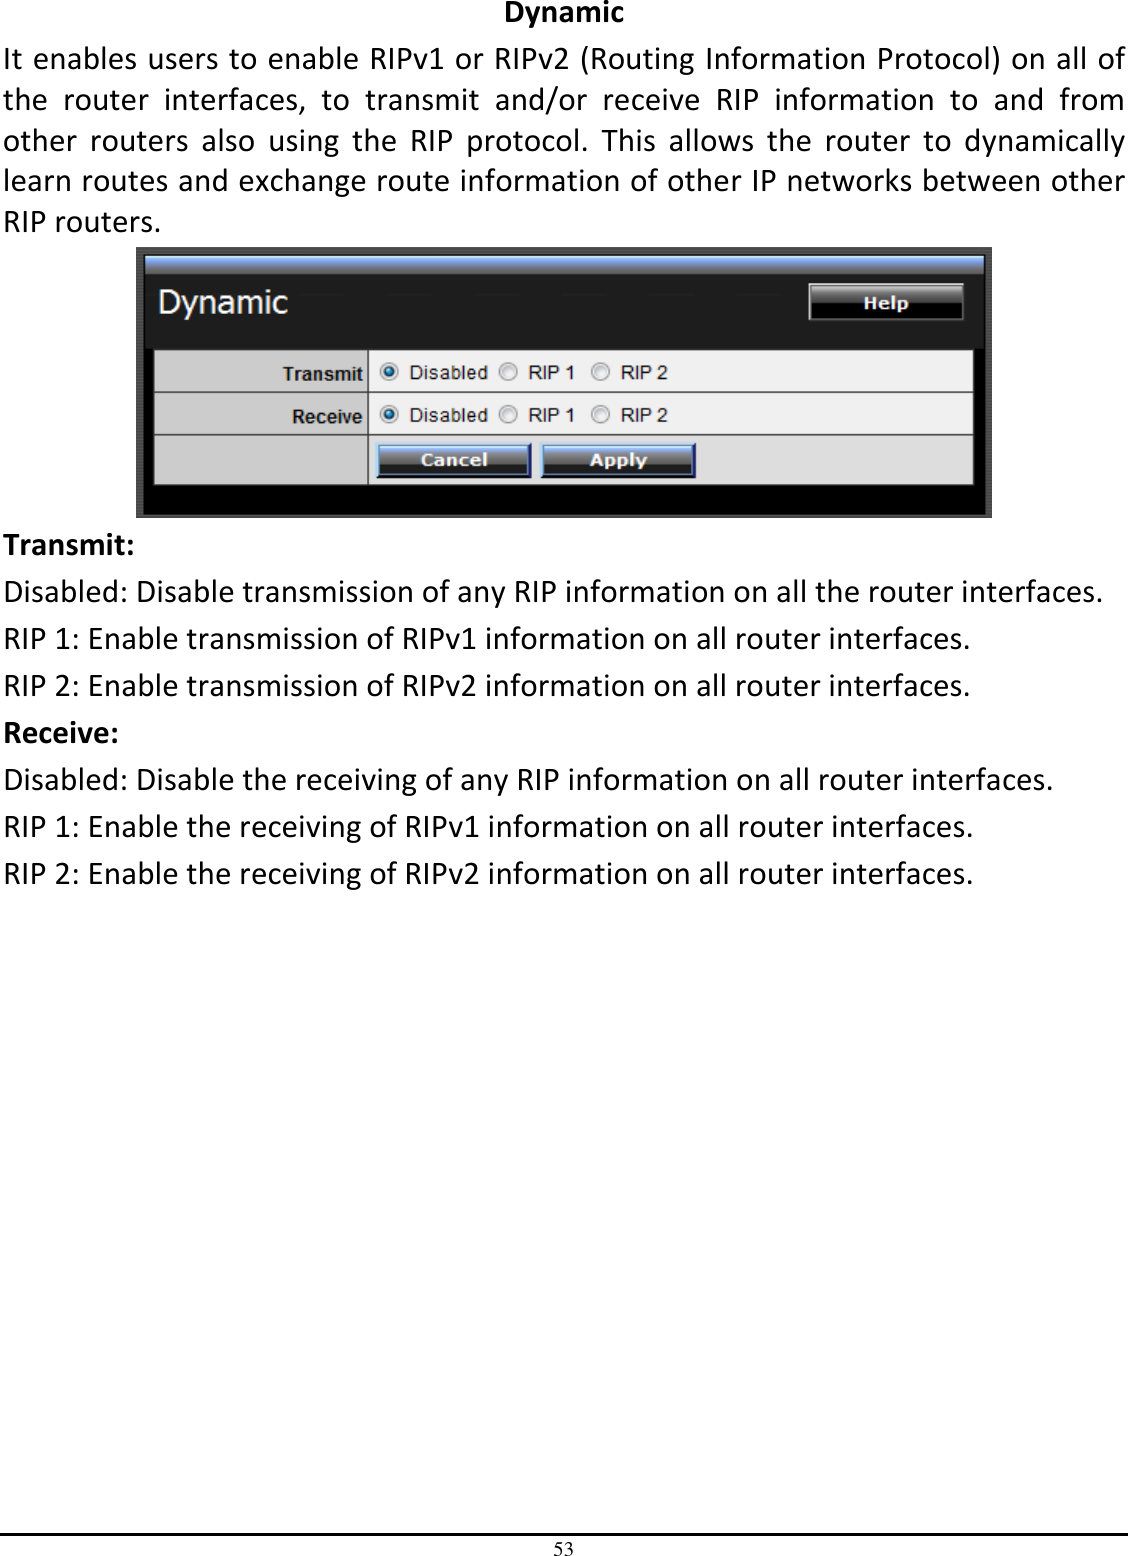 53 Dynamic It enables users to enable RIPv1 or RIPv2 (Routing Information Protocol) on all of the  router  interfaces,  to  transmit  and/or  receive  RIP  information  to  and  from other  routers  also  using  the  RIP  protocol.  This  allows  the  router  to  dynamically learn routes and exchange route information of other IP networks between other RIP routers.  Transmit: Disabled: Disable transmission of any RIP information on all the router interfaces.  RIP 1: Enable transmission of RIPv1 information on all router interfaces. RIP 2: Enable transmission of RIPv2 information on all router interfaces. Receive:  Disabled: Disable the receiving of any RIP information on all router interfaces. RIP 1: Enable the receiving of RIPv1 information on all router interfaces. RIP 2: Enable the receiving of RIPv2 information on all router interfaces.  